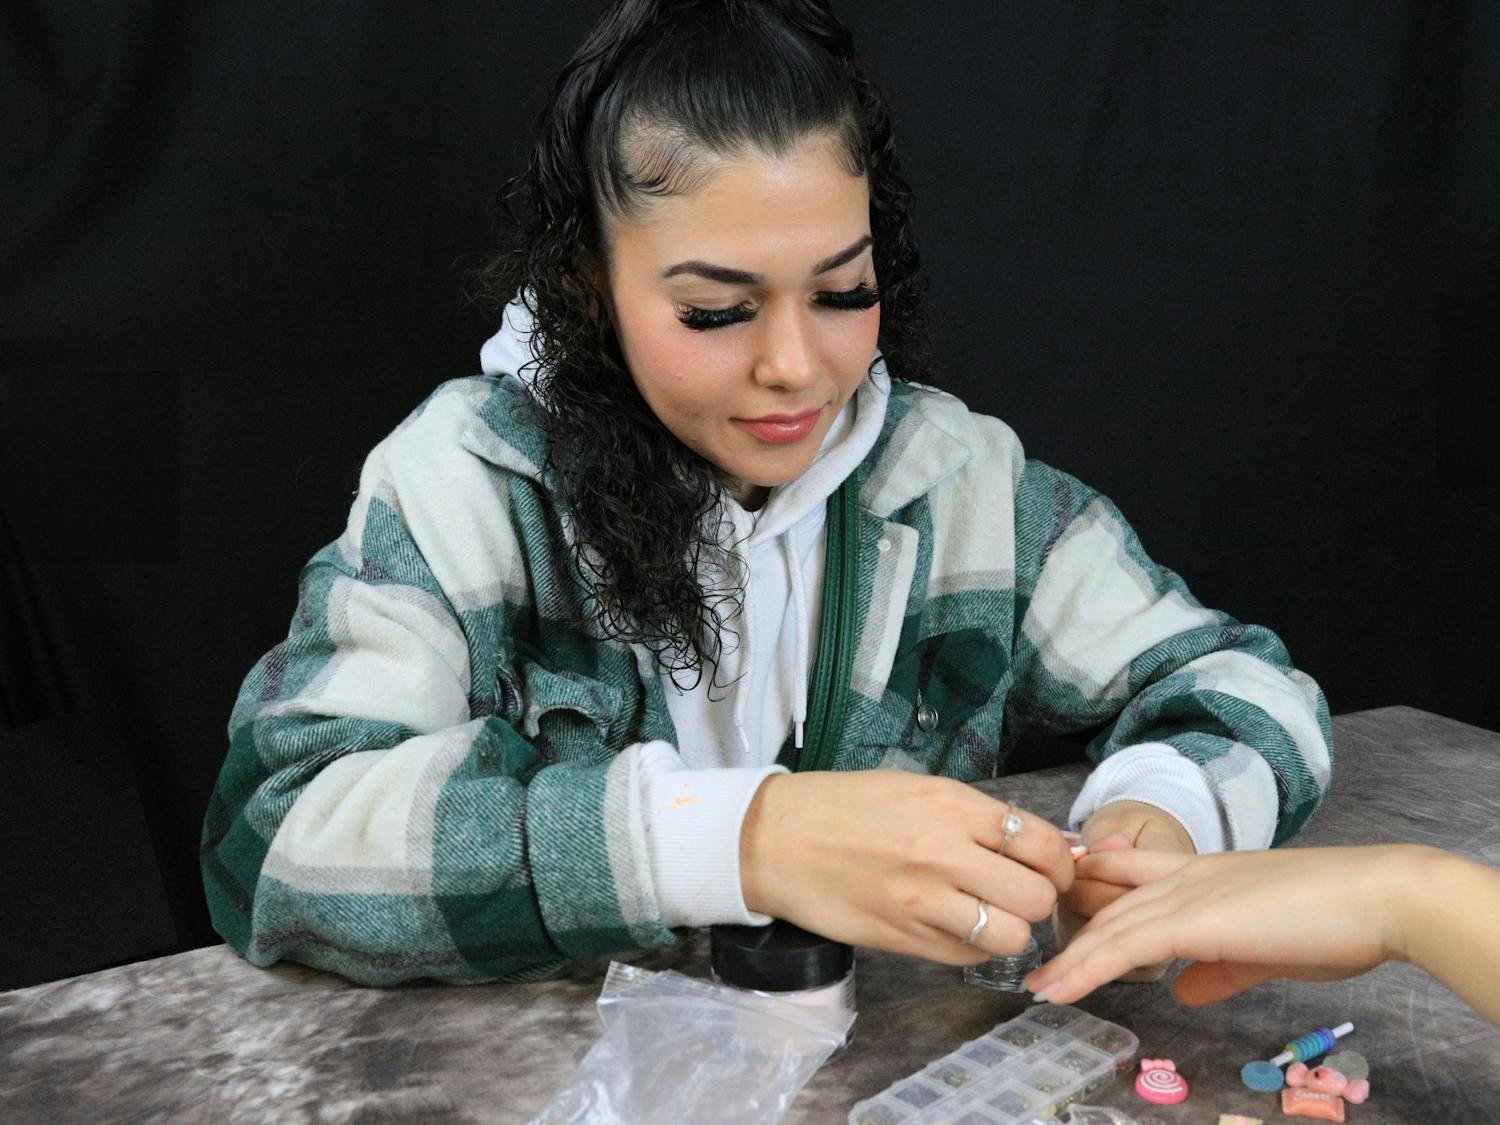 Erielle Ortiz started her business by selling $20 sets in her hometown of Queens, New York.